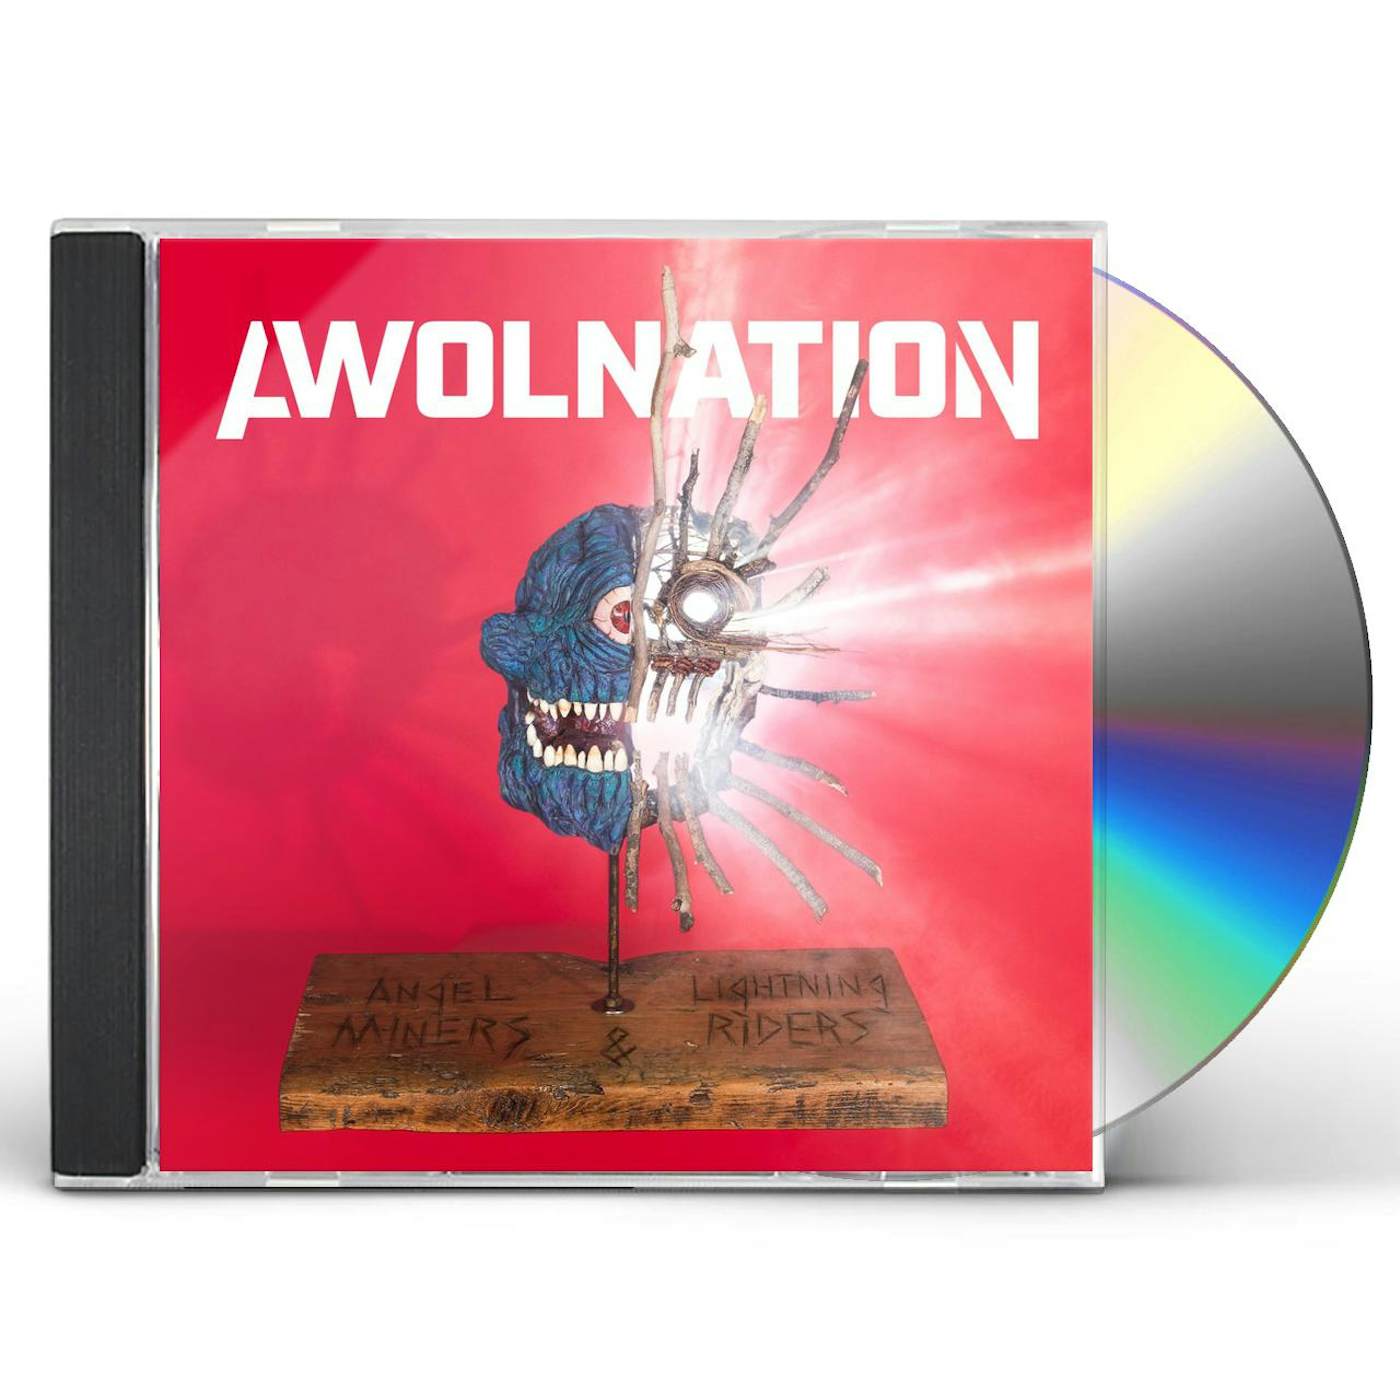 AWOLNATION ANGEL MINERS & THE LIGHTNING RIDERS CD